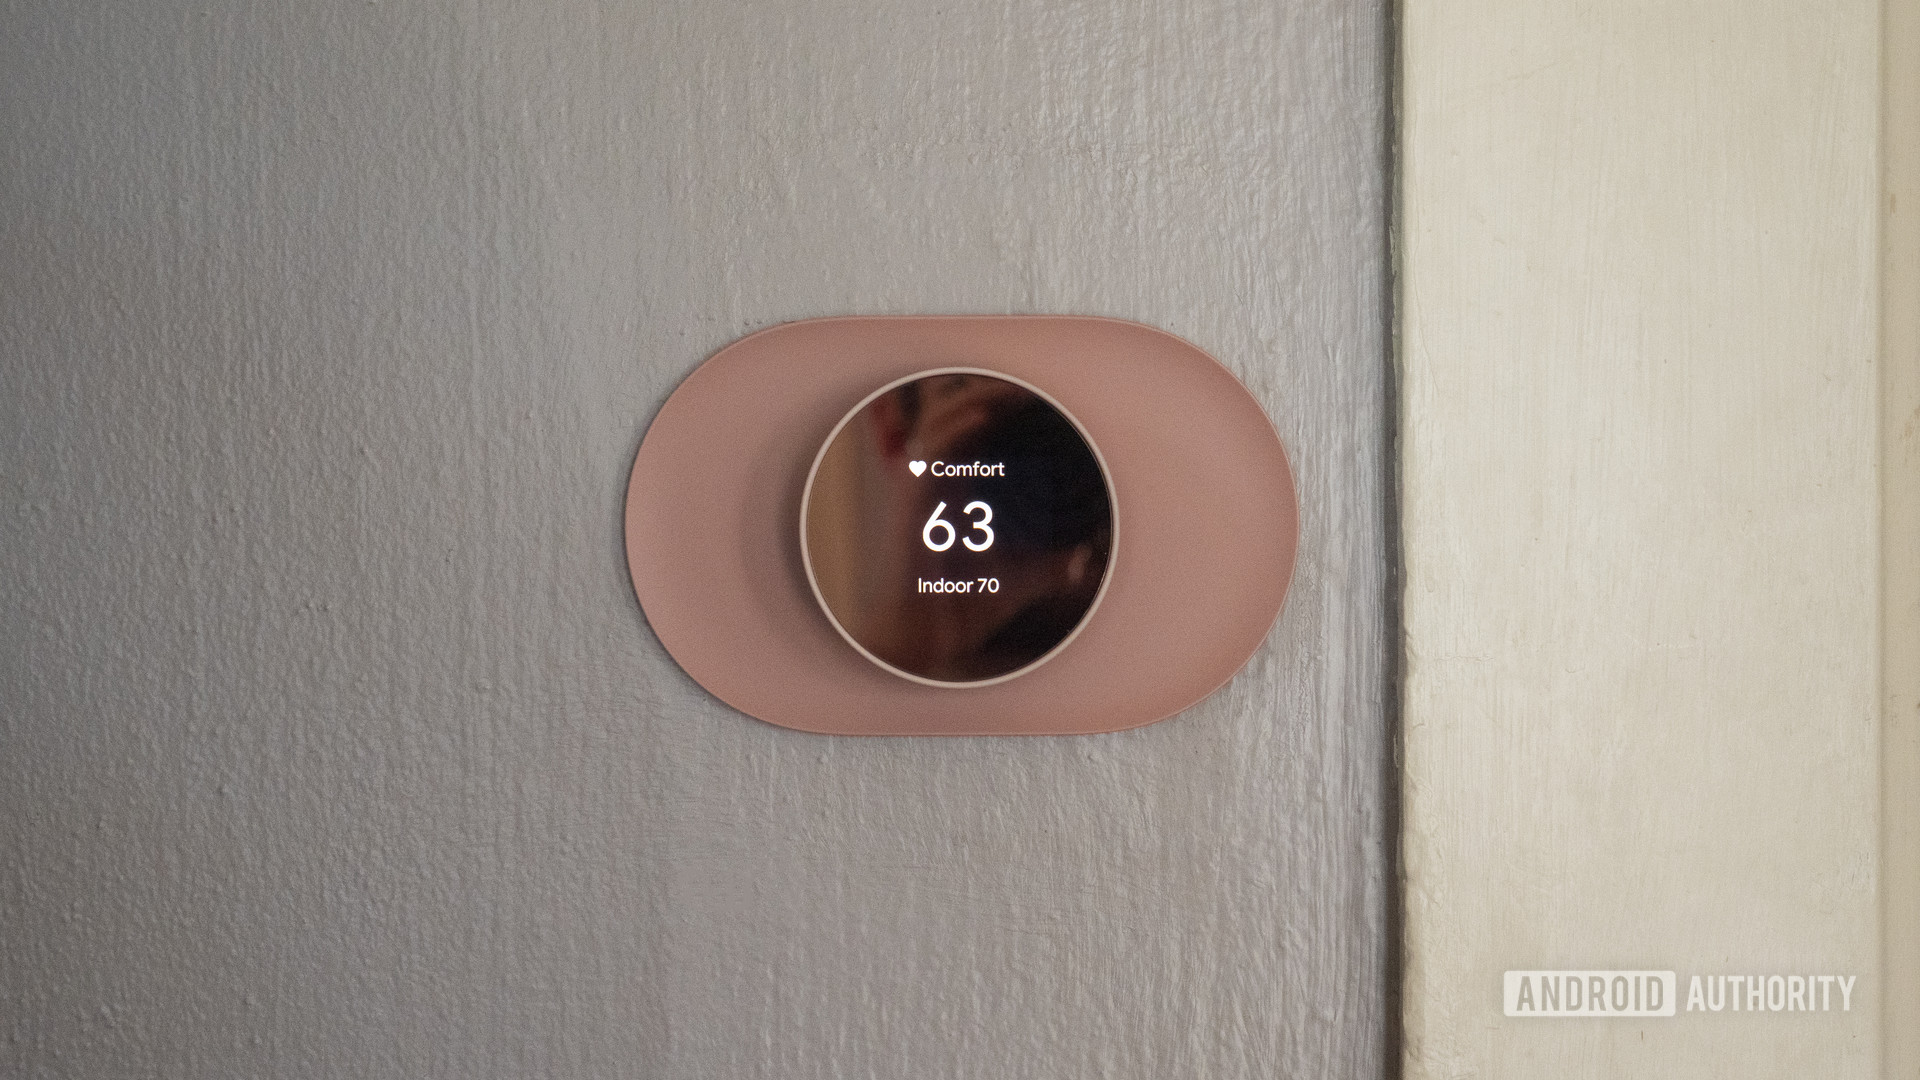 How to reset or restart your Google Nest Thermostat Android Authority